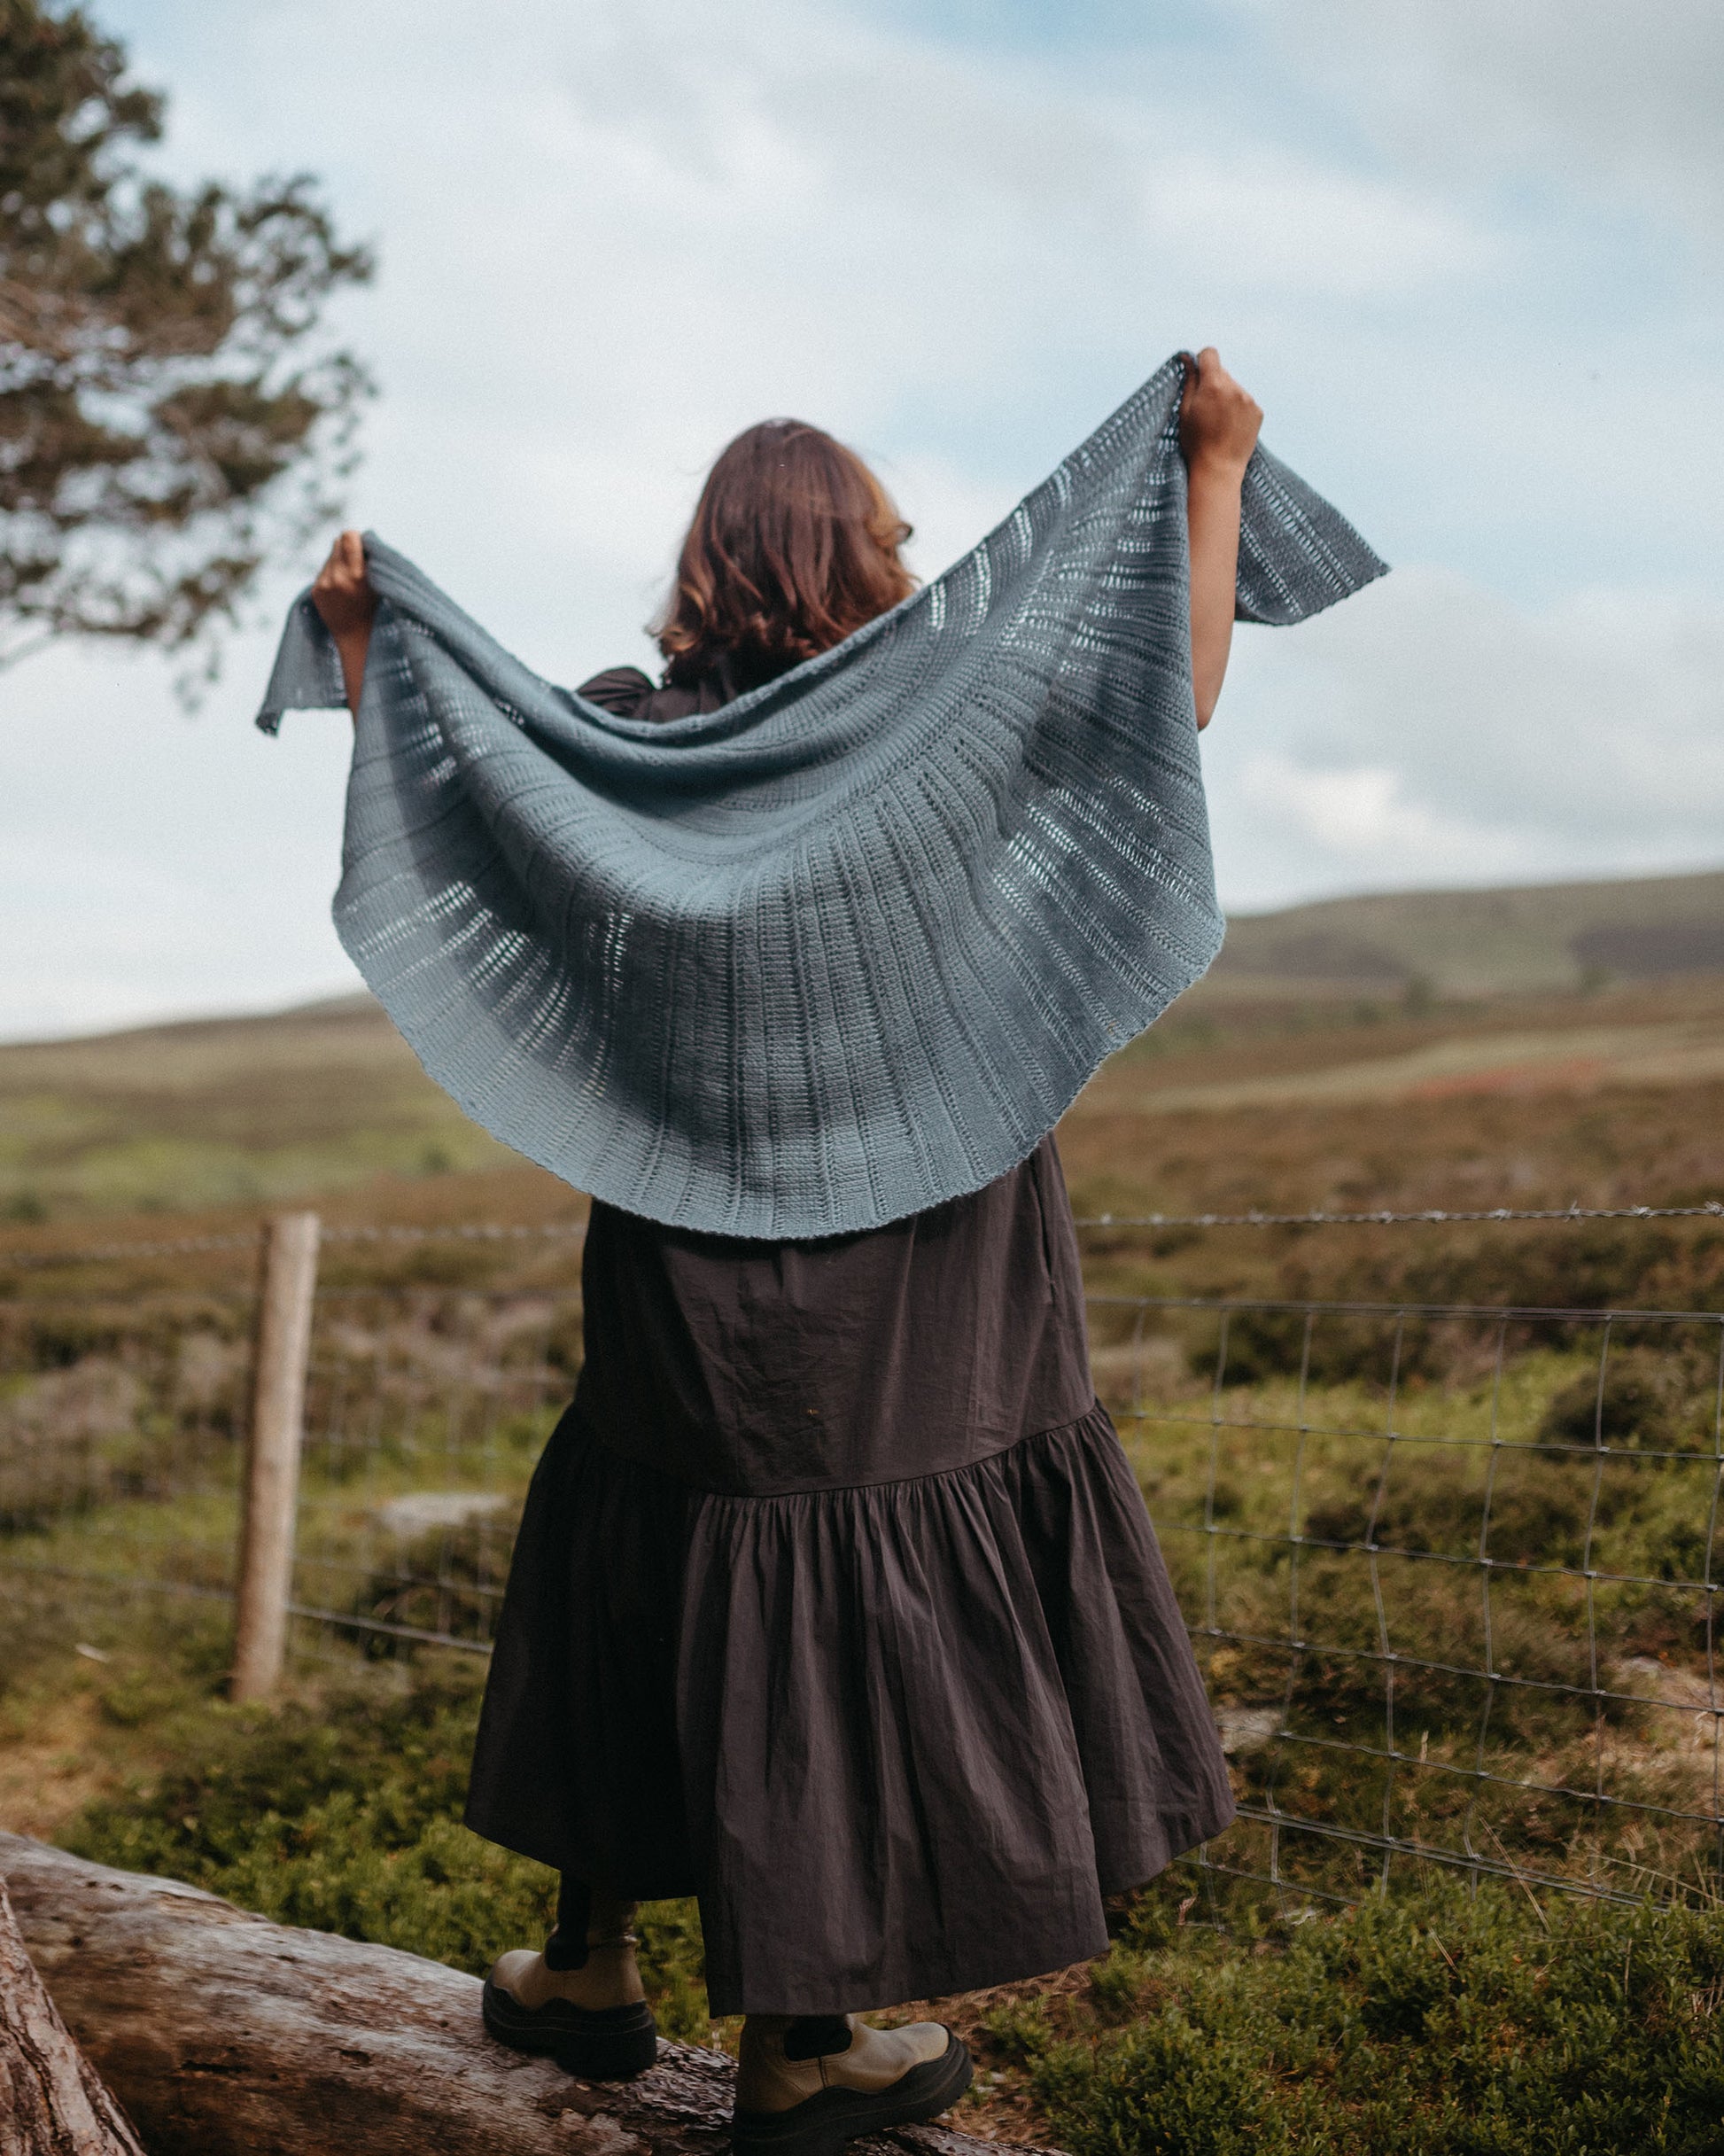 Glór is a large half circle shawl with rays of Tunisian stitch panels radiating from the centre.